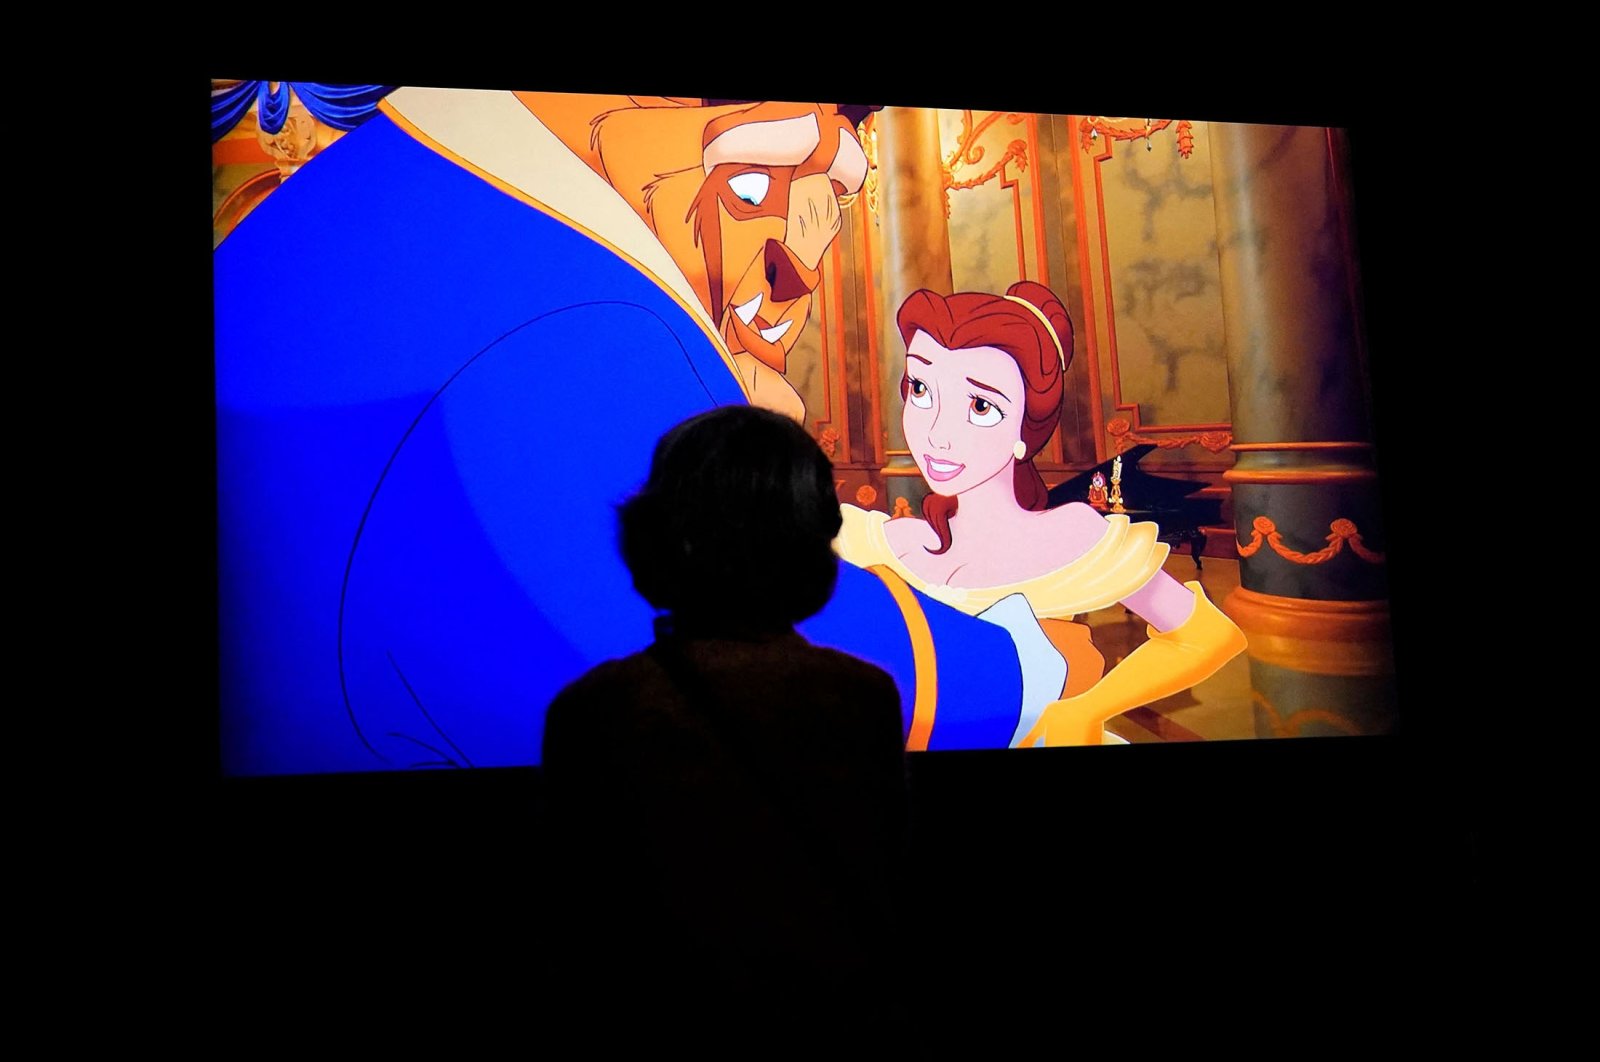 People look at a screen during a press preview for “Inspiring Walt Disney: The Animation of French Decorative Arts” at the Met in New York, U.S., Dec. 6, 2021. (AFP Photo)